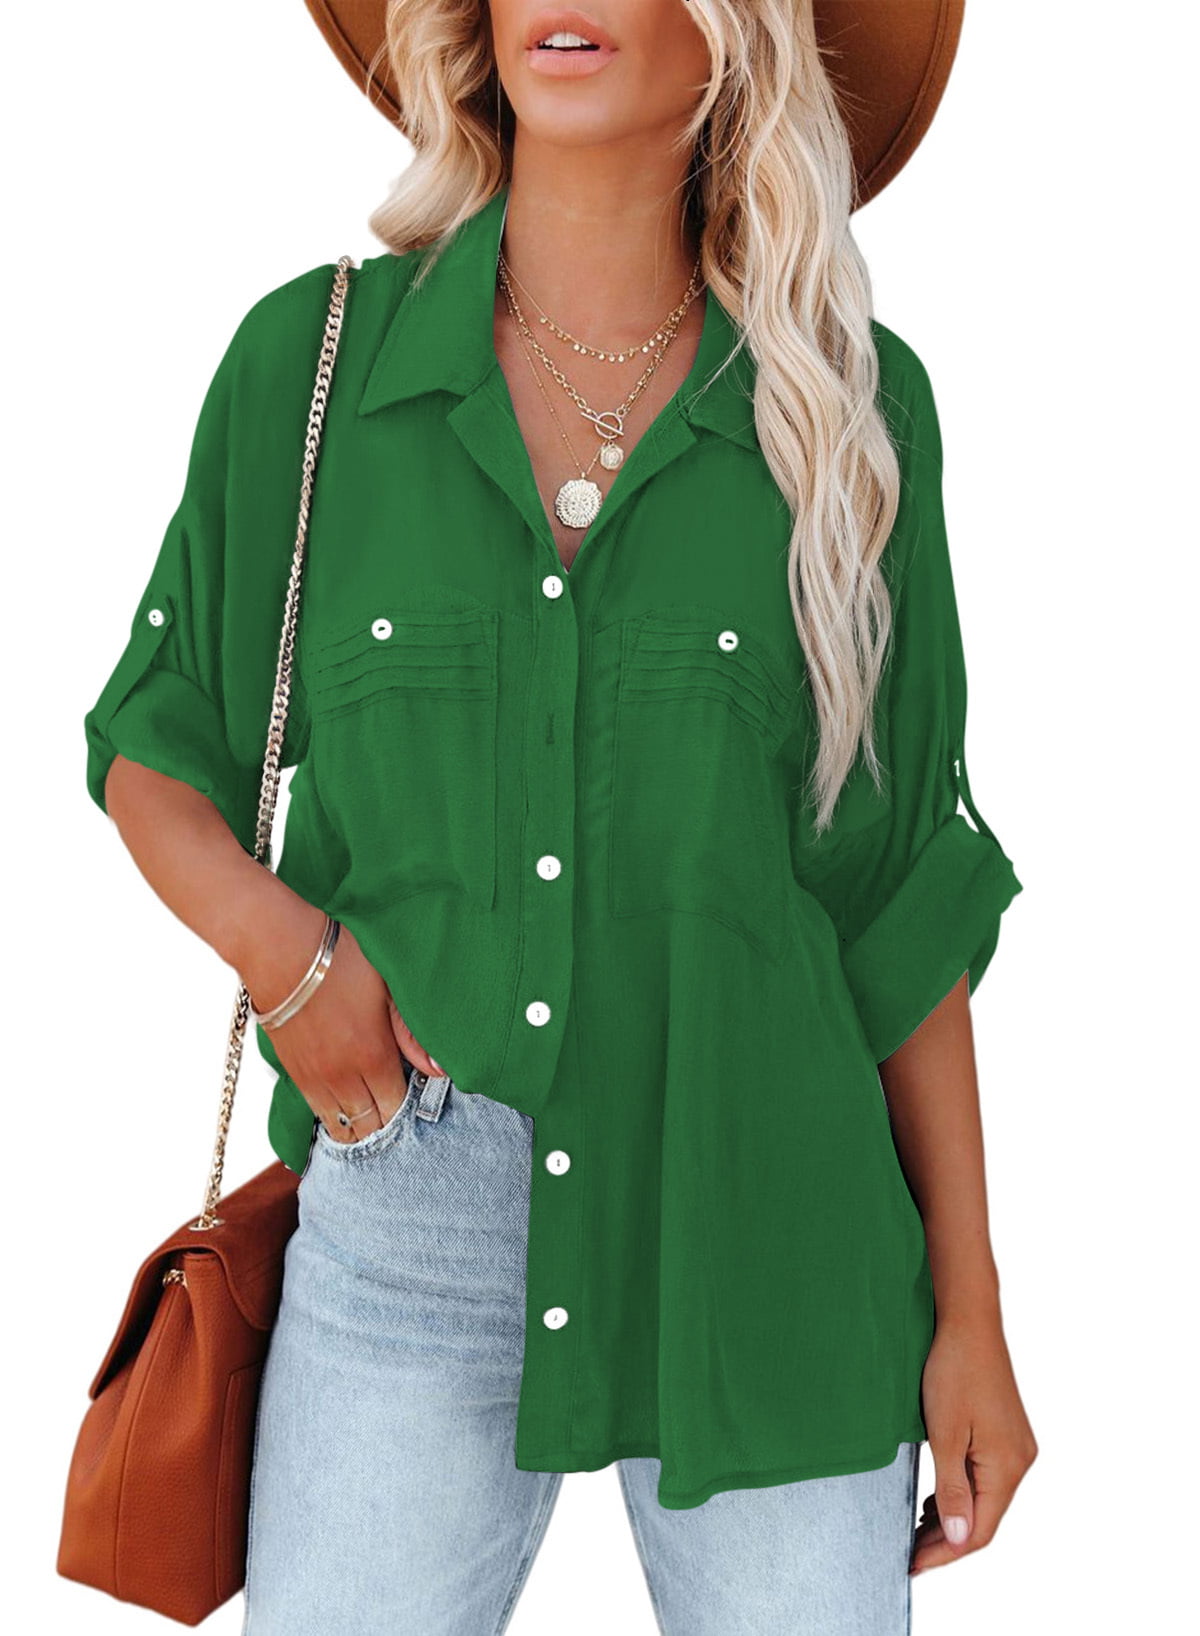 Eytino Womens Casual Roll up Sleeve Blouse Top Button Down Tunic Shirts ...